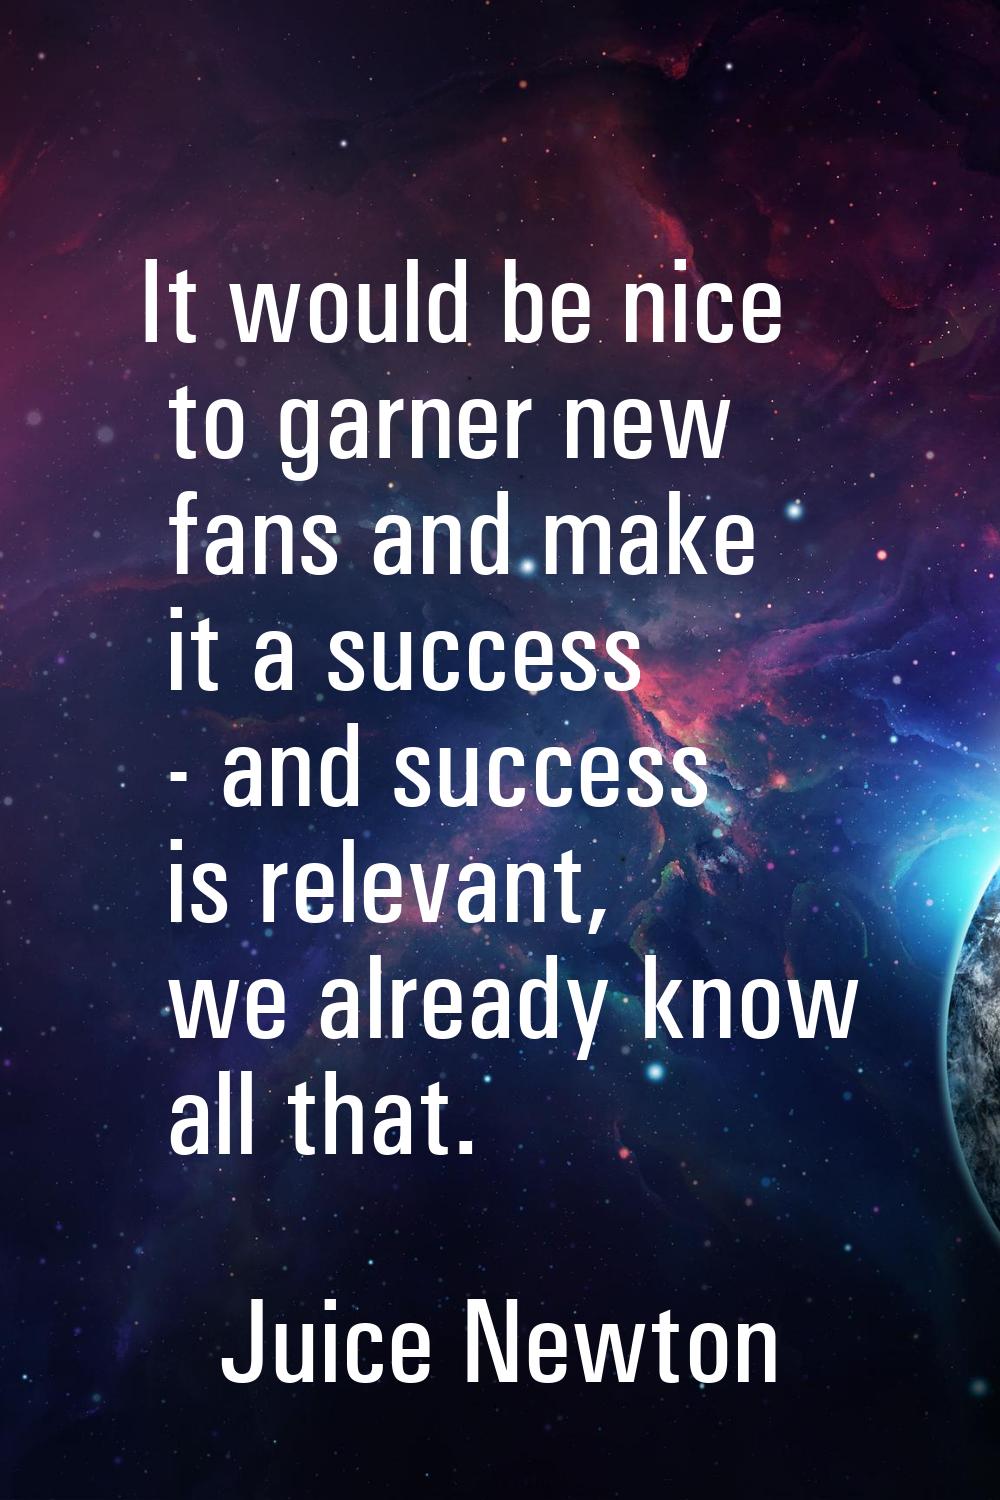 It would be nice to garner new fans and make it a success - and success is relevant, we already kno